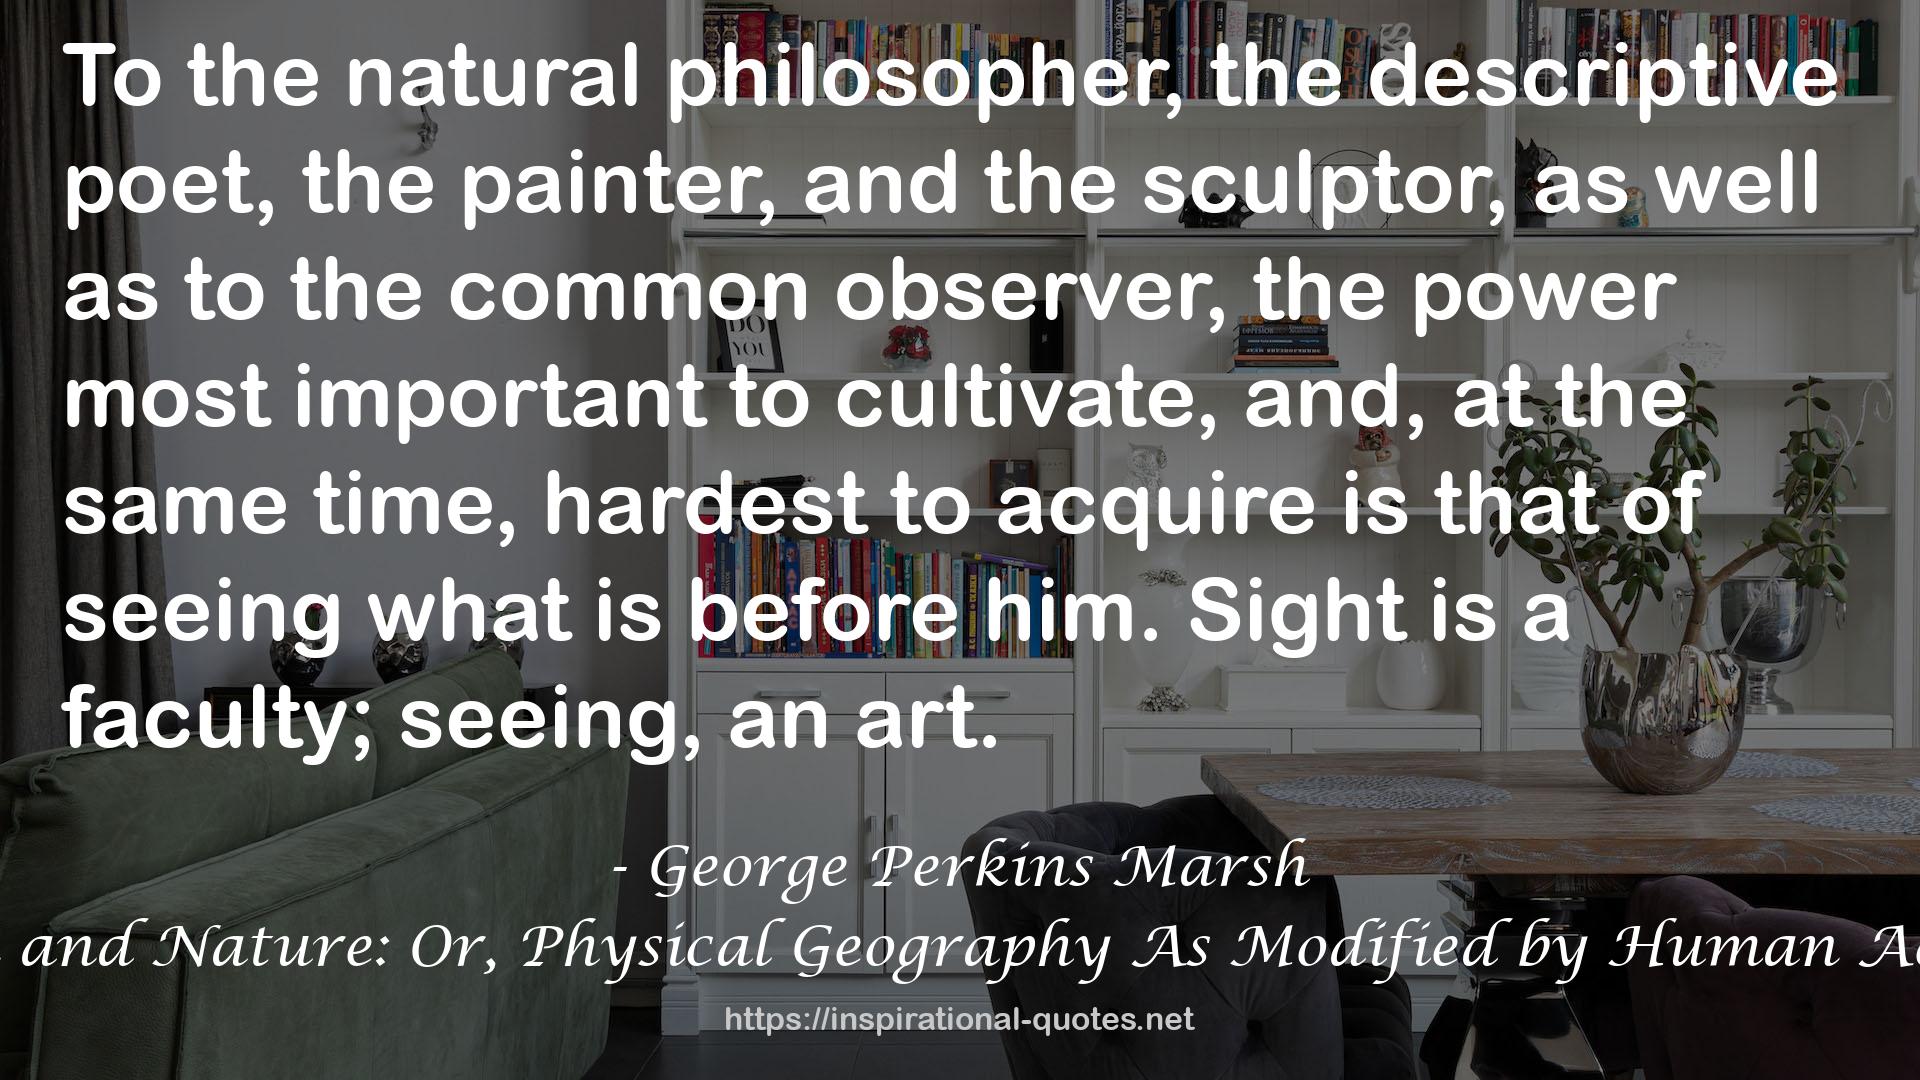 Man and Nature: Or, Physical Geography As Modified by Human Action QUOTES